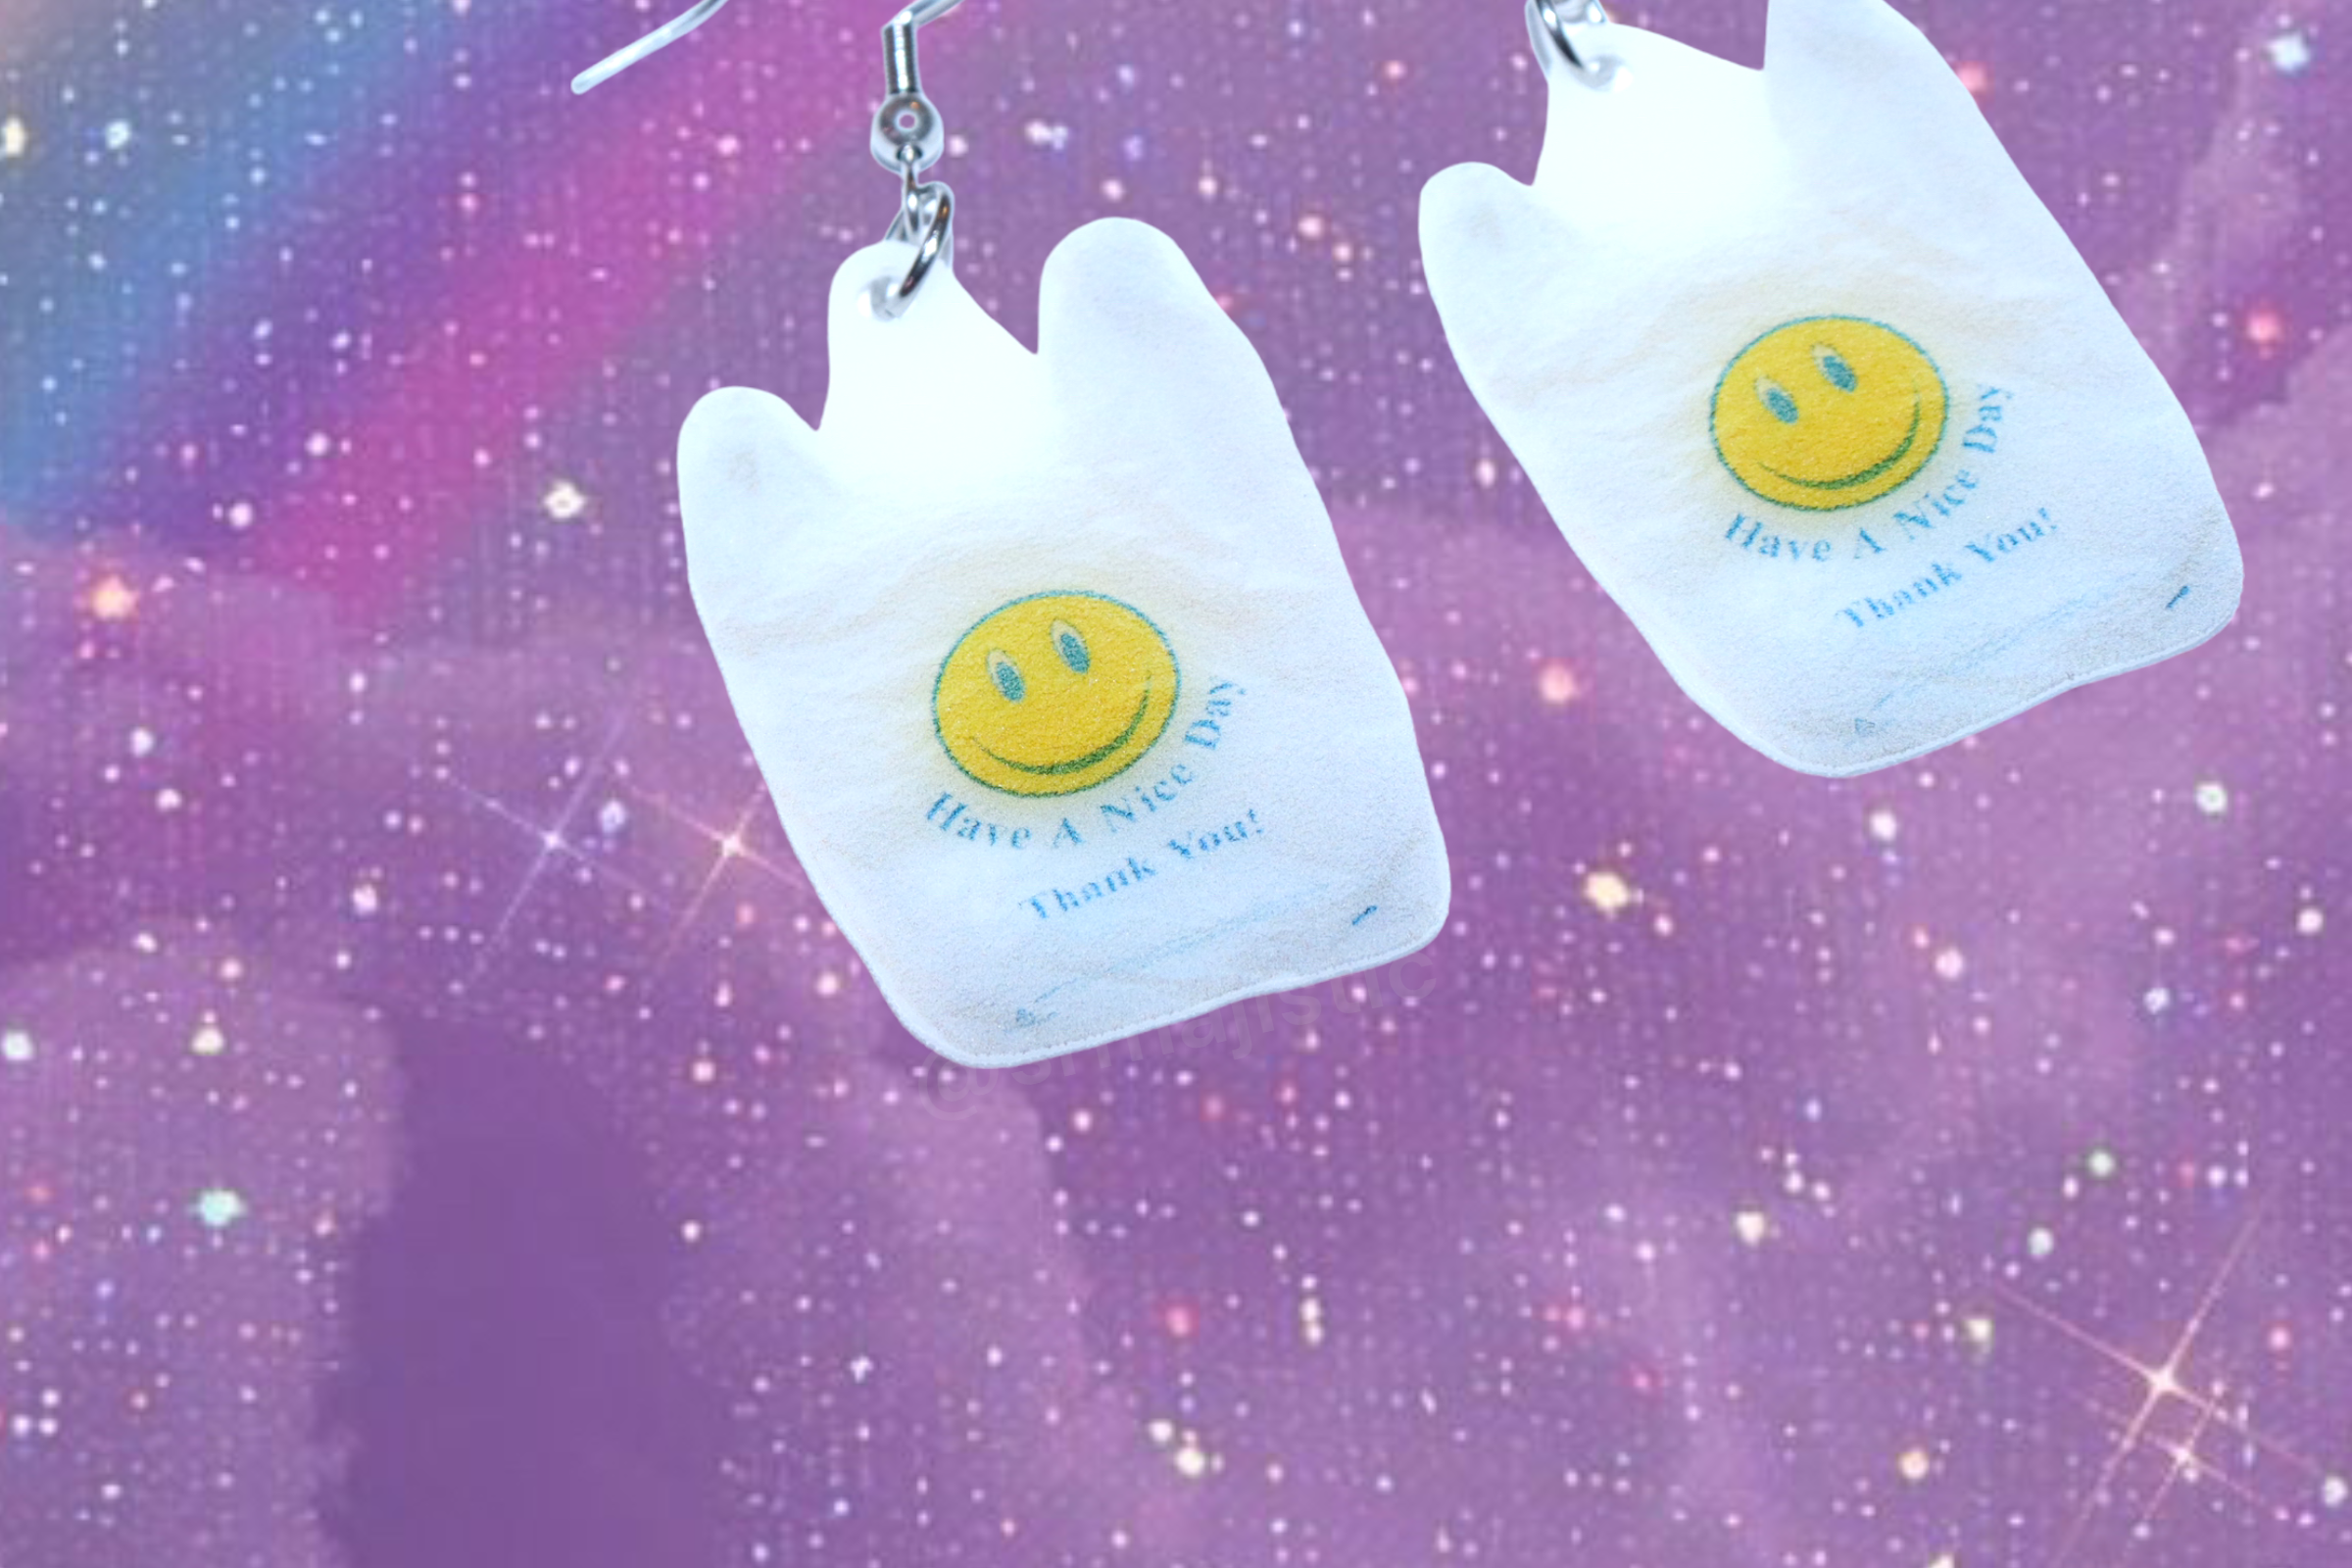 Have a Nice Day Thank You! Plastic Bag 2D Handmade Earrings!